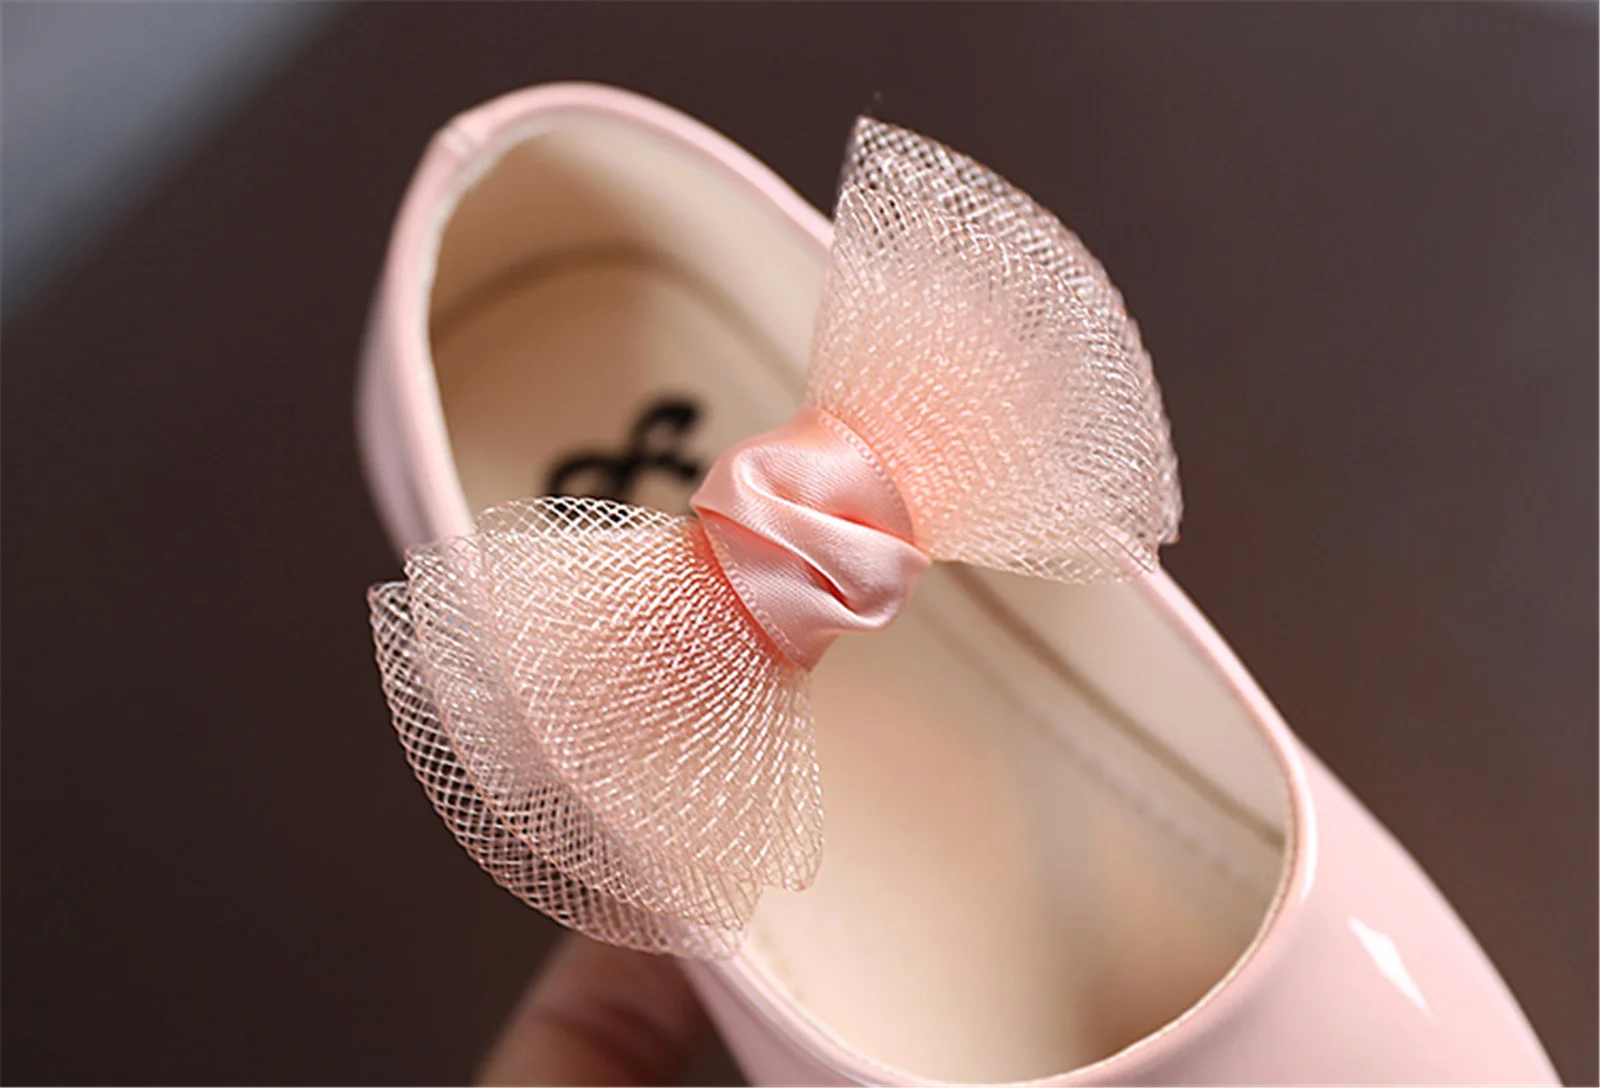 Children Girls Shoes Princess Ballet Flats Party Wedding Shoes Bowknot PU Leather Shoes Kids Summer Flats 1-6Y extra wide fit children's shoes